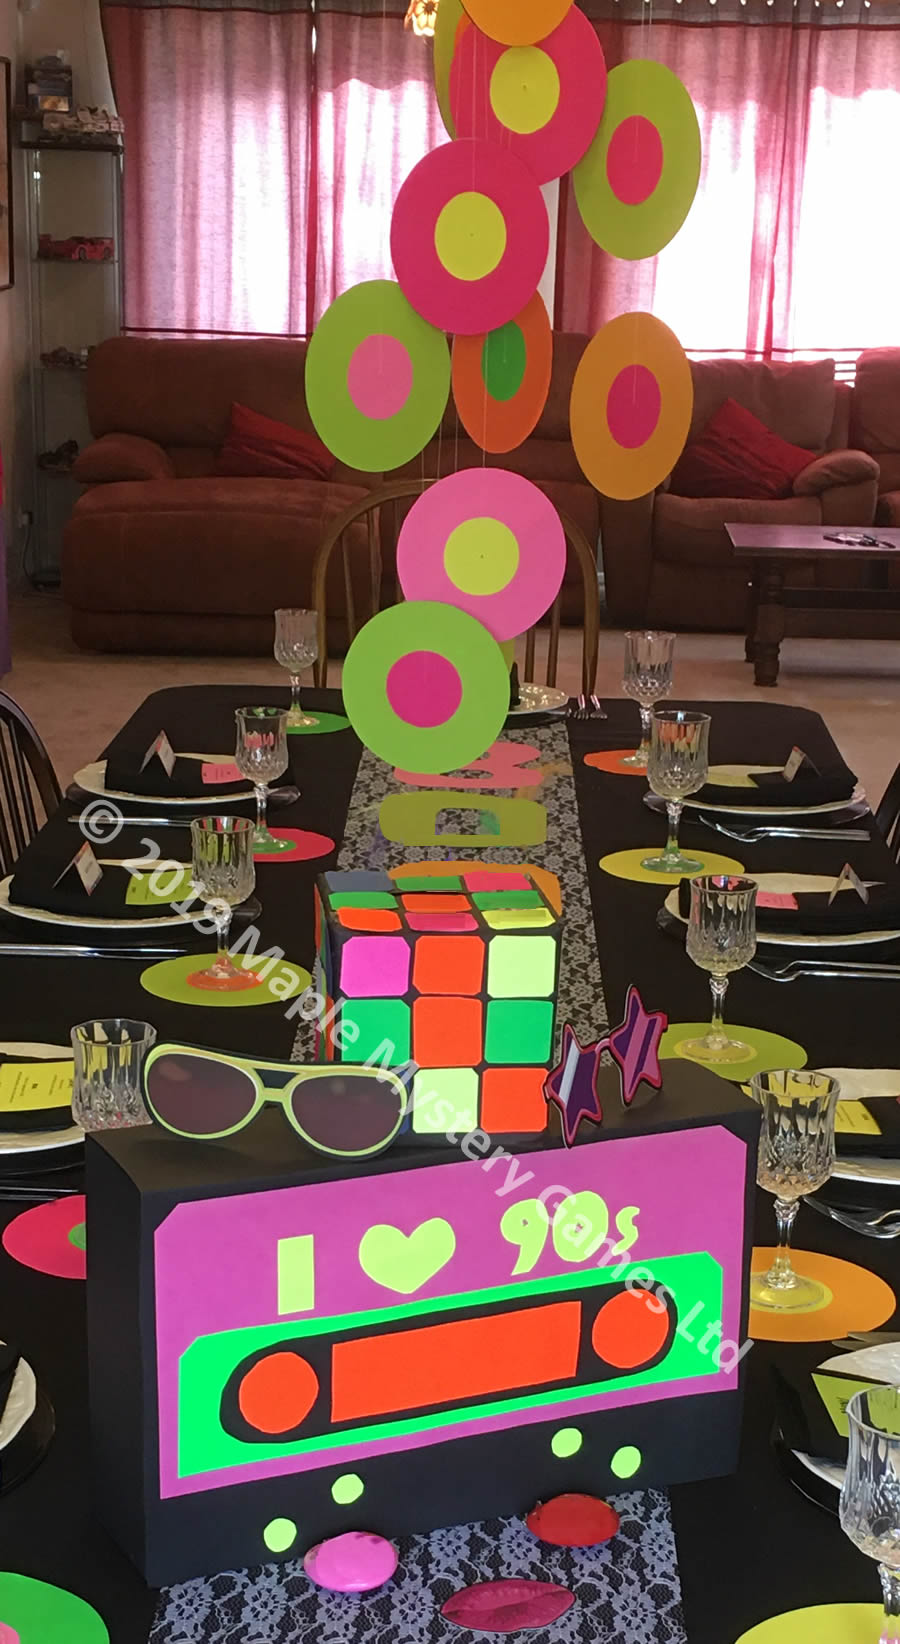 1990s centrepiece for party table: 90s cassette, Rubiks Cube and Single Record mobile all made out of neon card